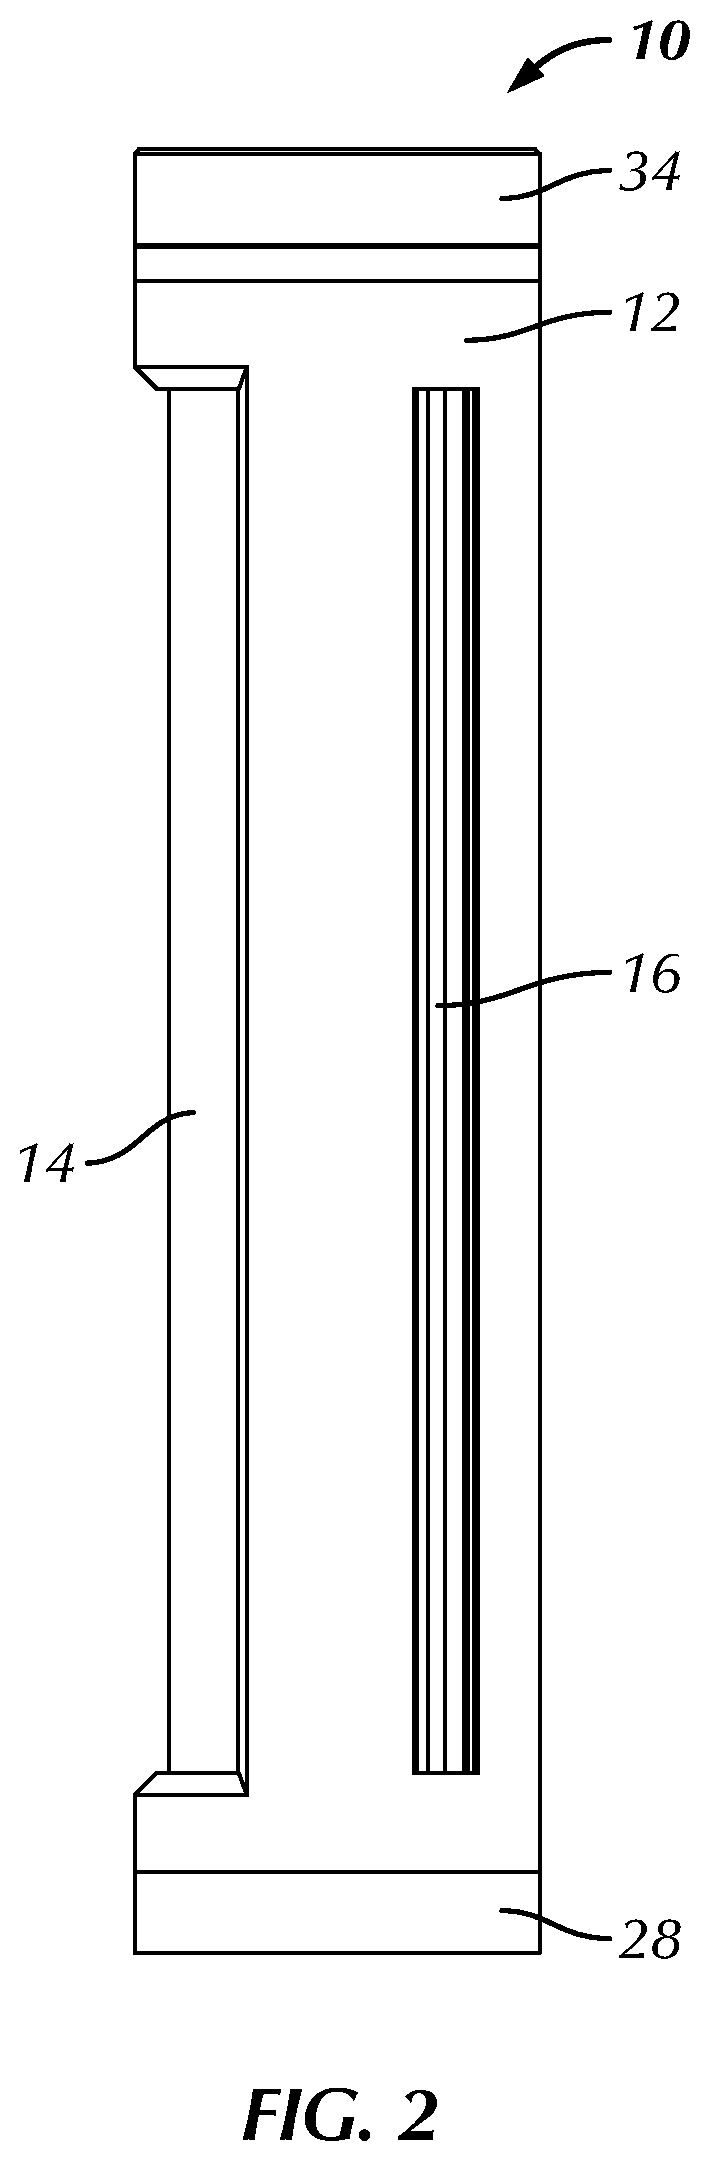 Apparatus for Rolling or Wrapping Materials Within an Elongated Wrapper, and Associated Accessories